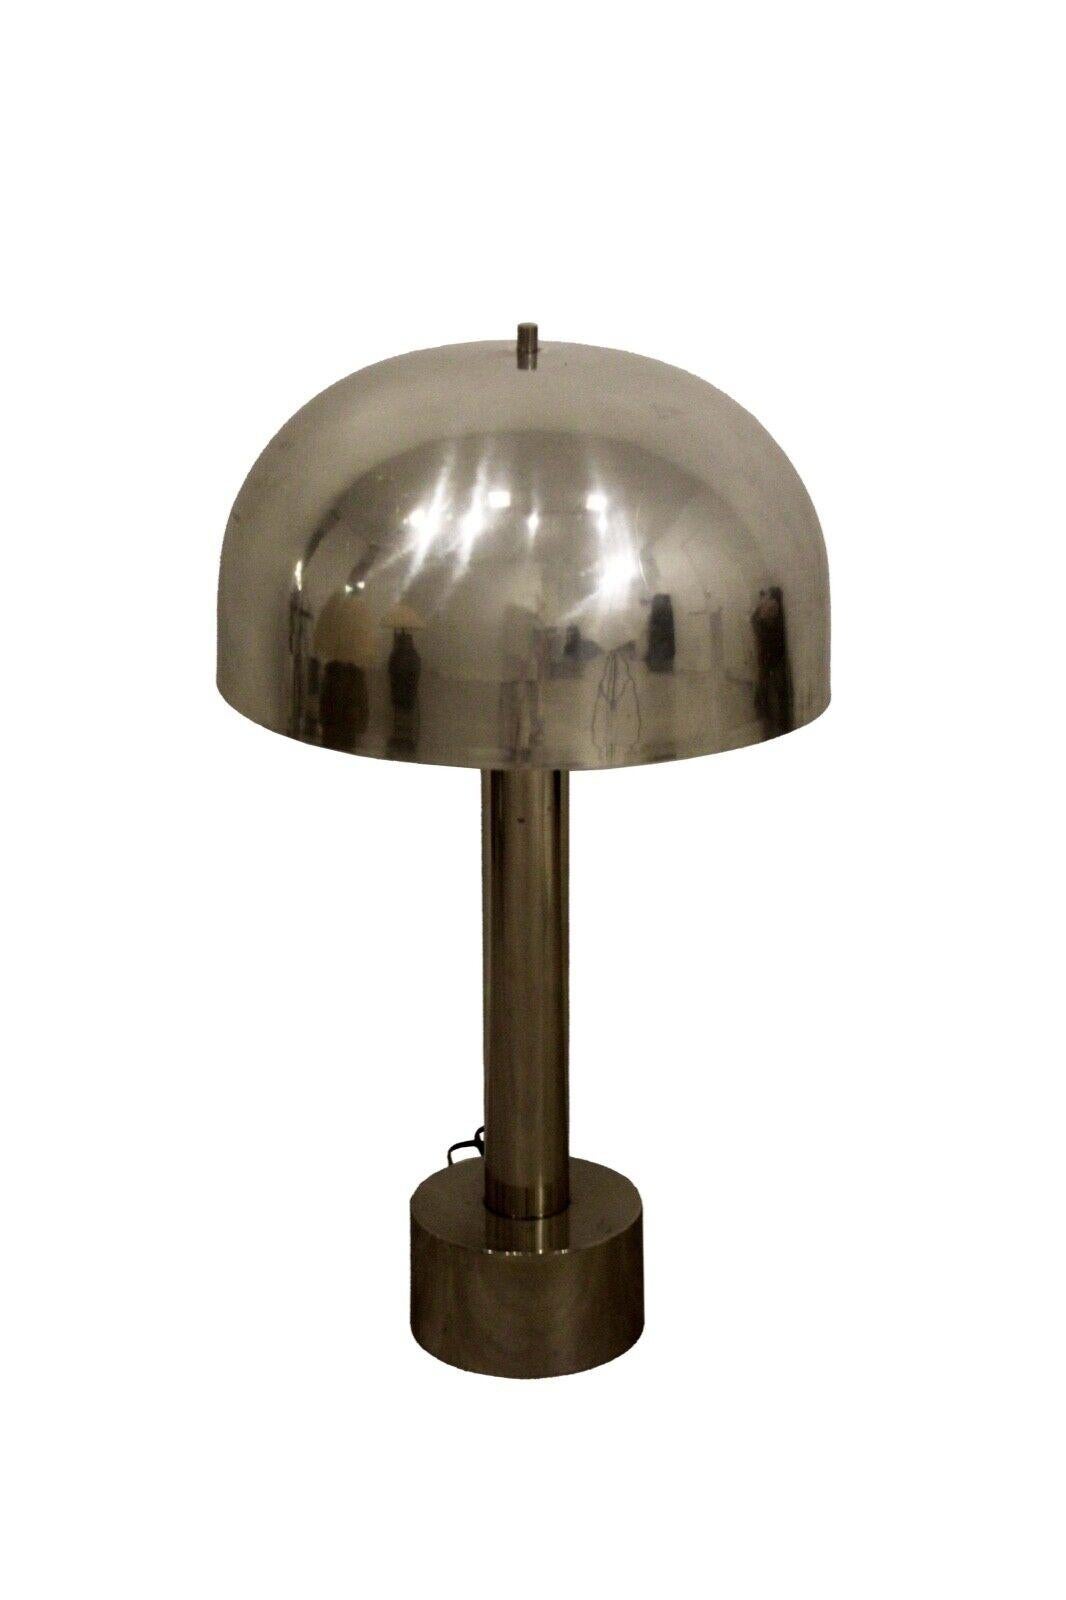 We present a polished aluminum chrome mushroom lamp by Robert Sonneman for Laurel. Circa 1980's, in very good condition. Dimensions: 17.25